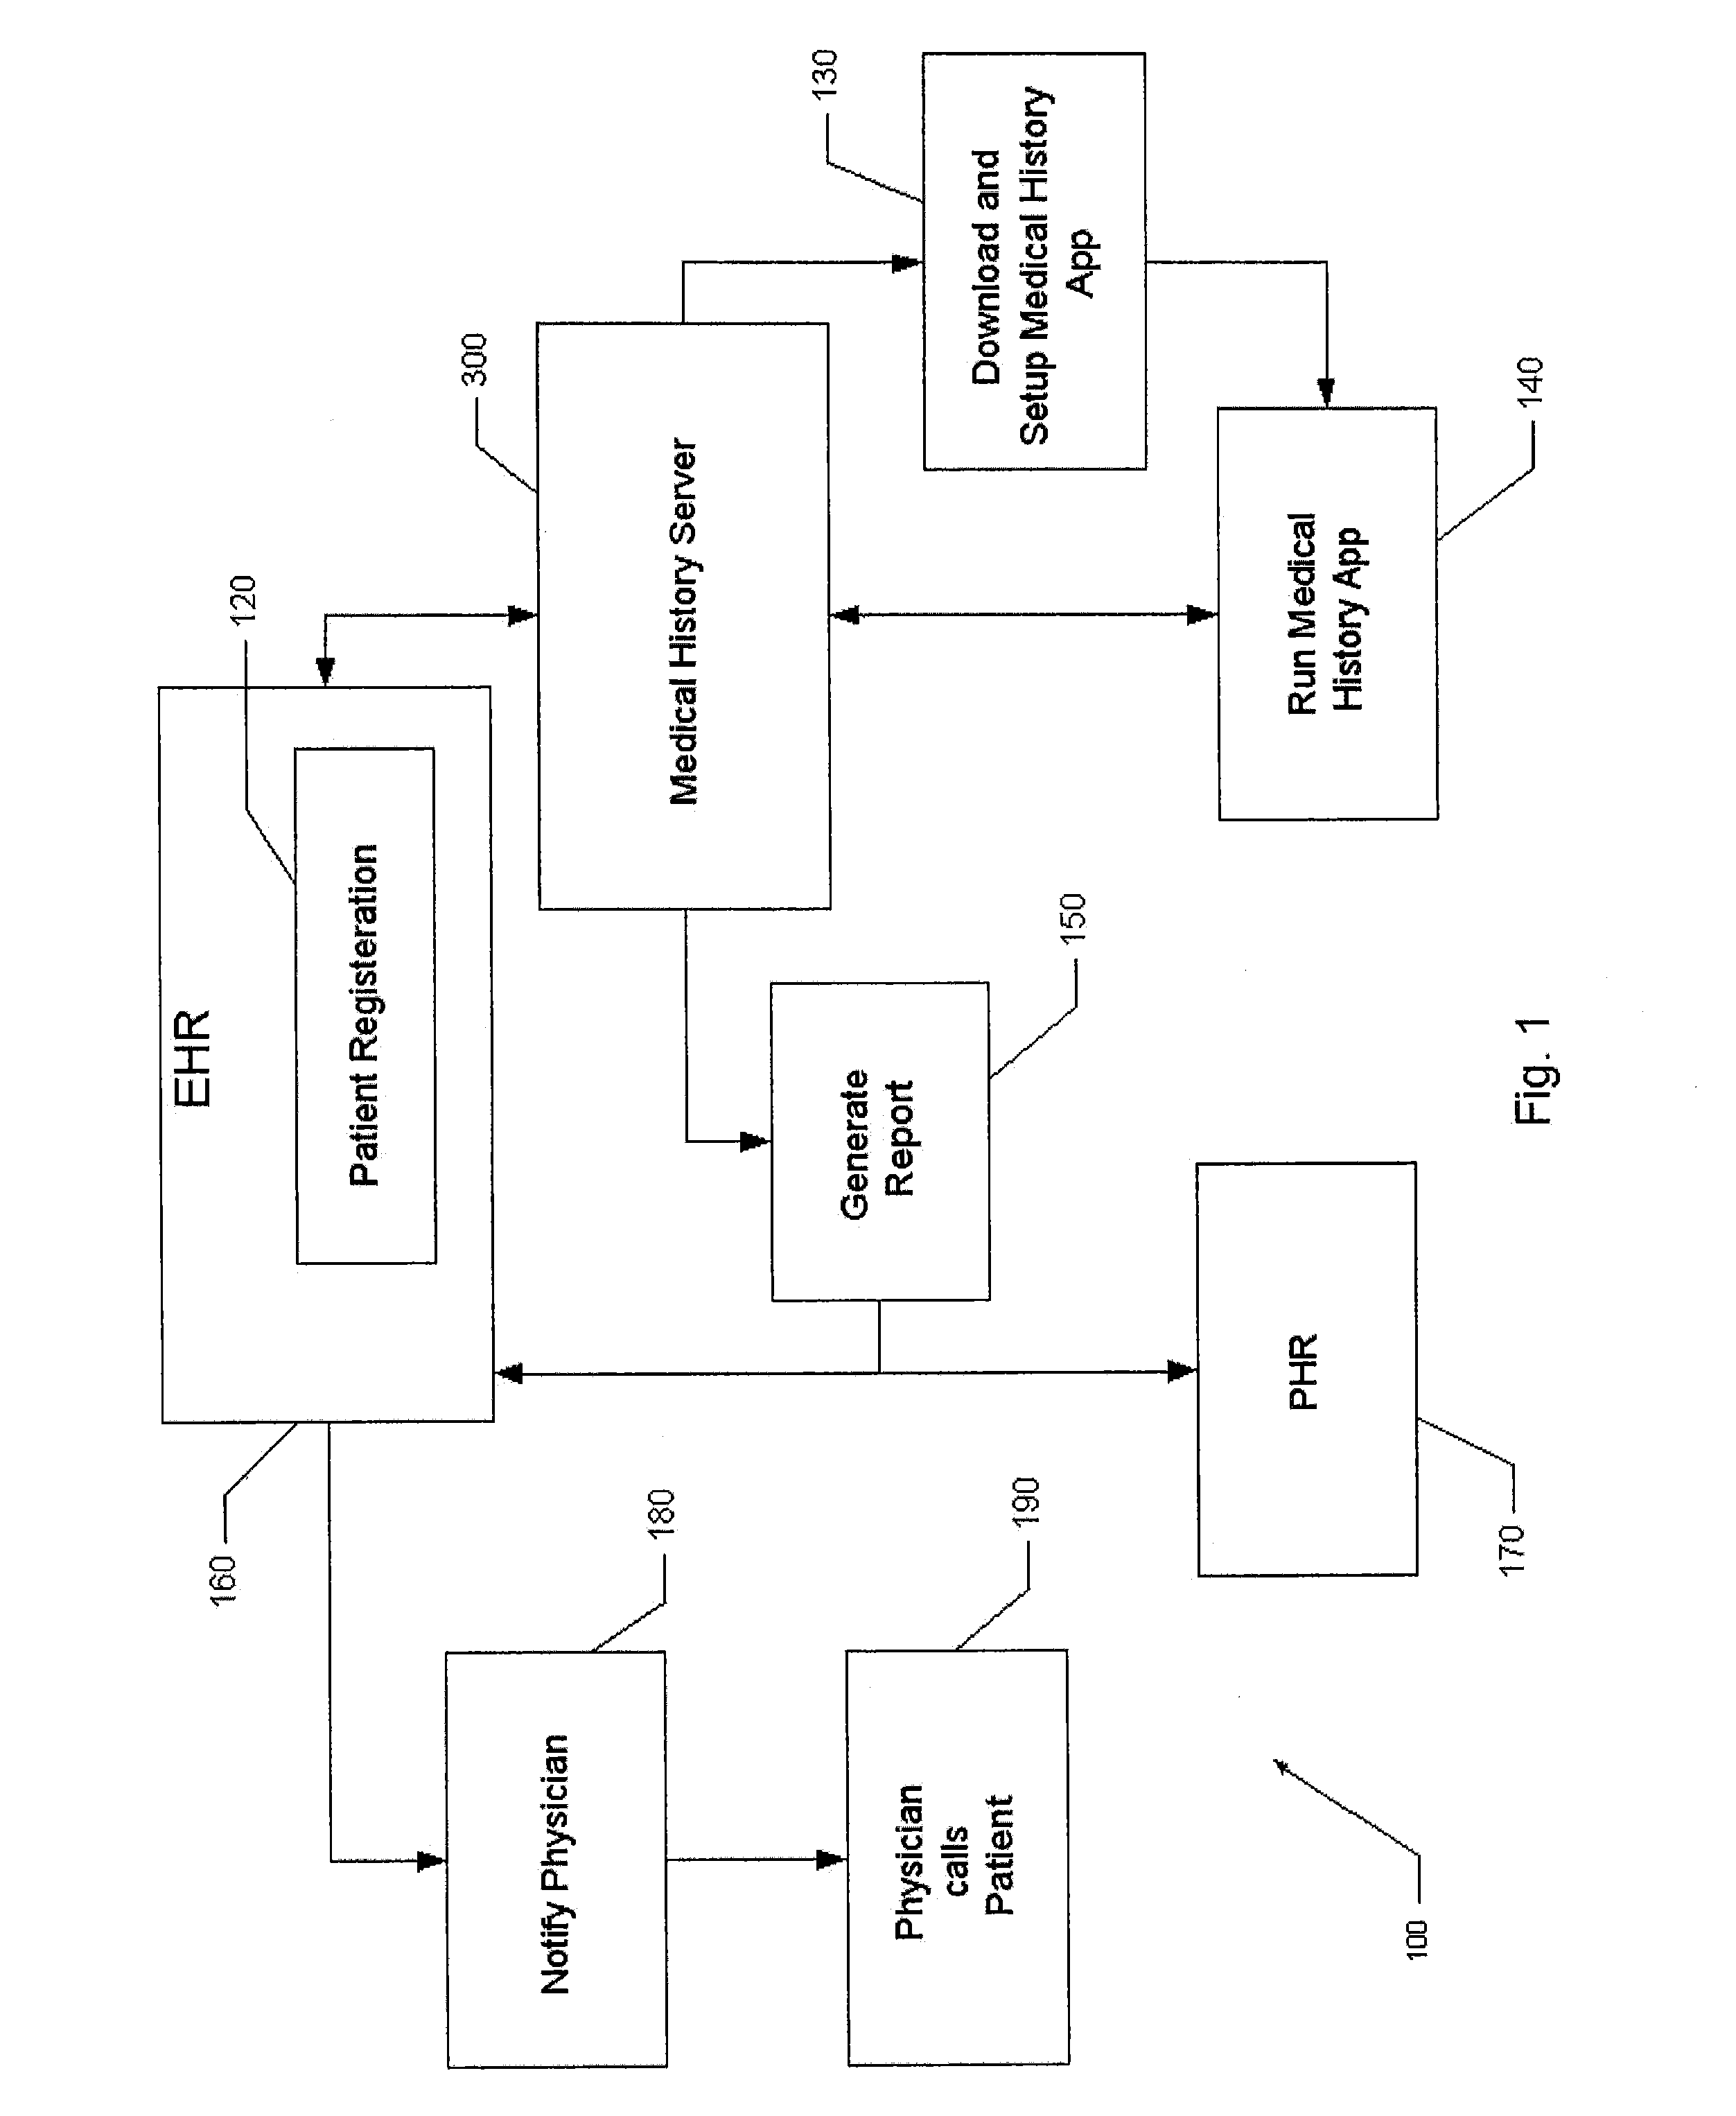 System and method for a patient initiated medical interview using a voice-based medical history questionnaire